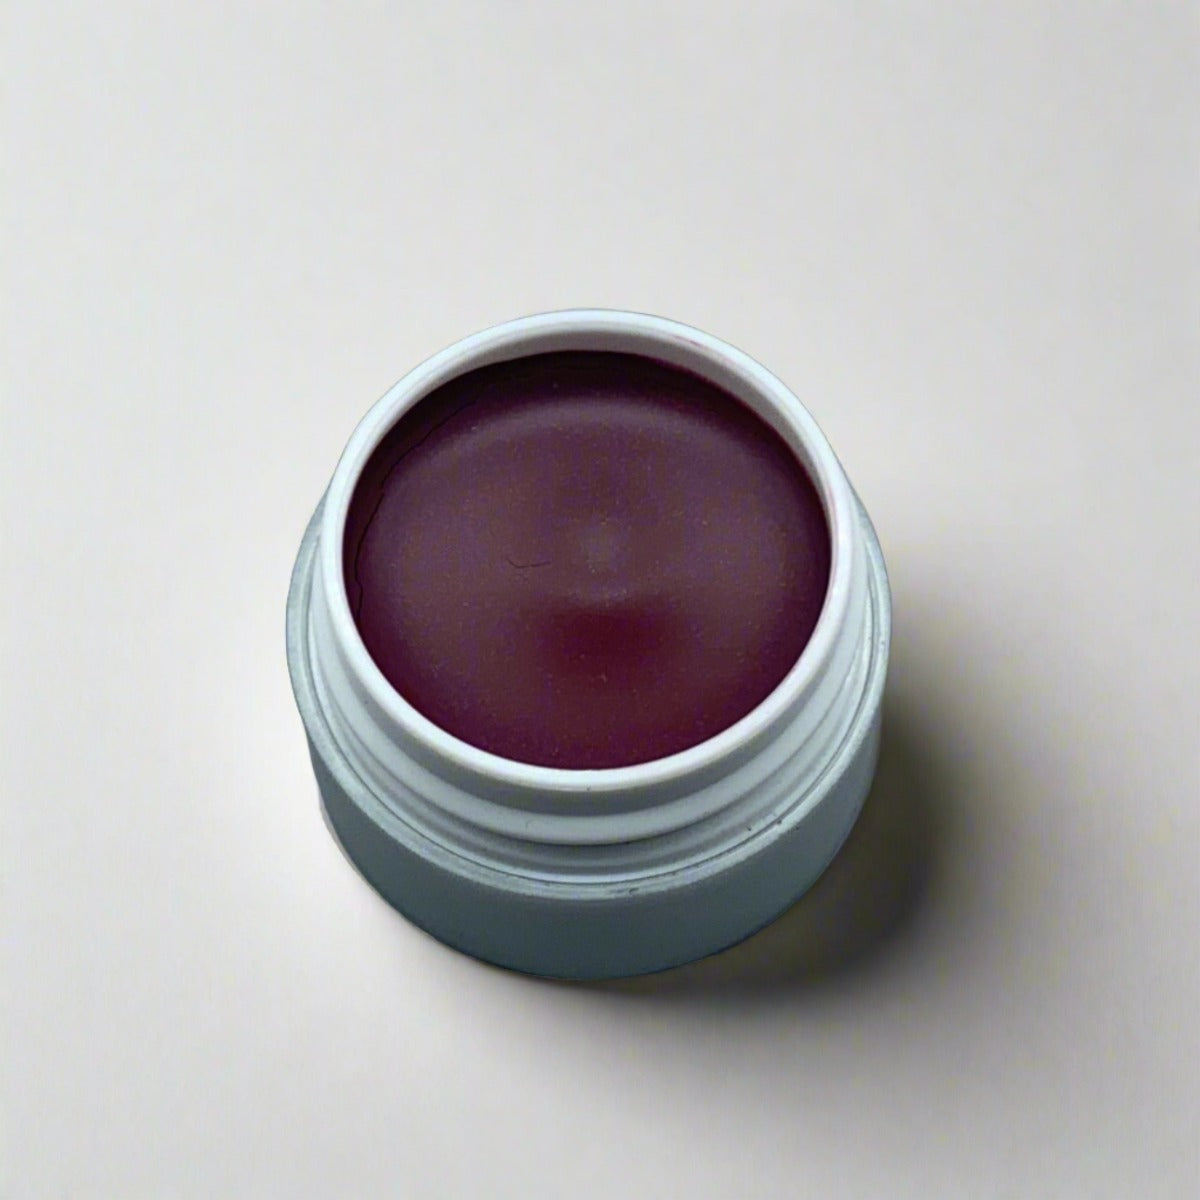 Cosmetic jar of black raspberry lip crème displaying its color and texture